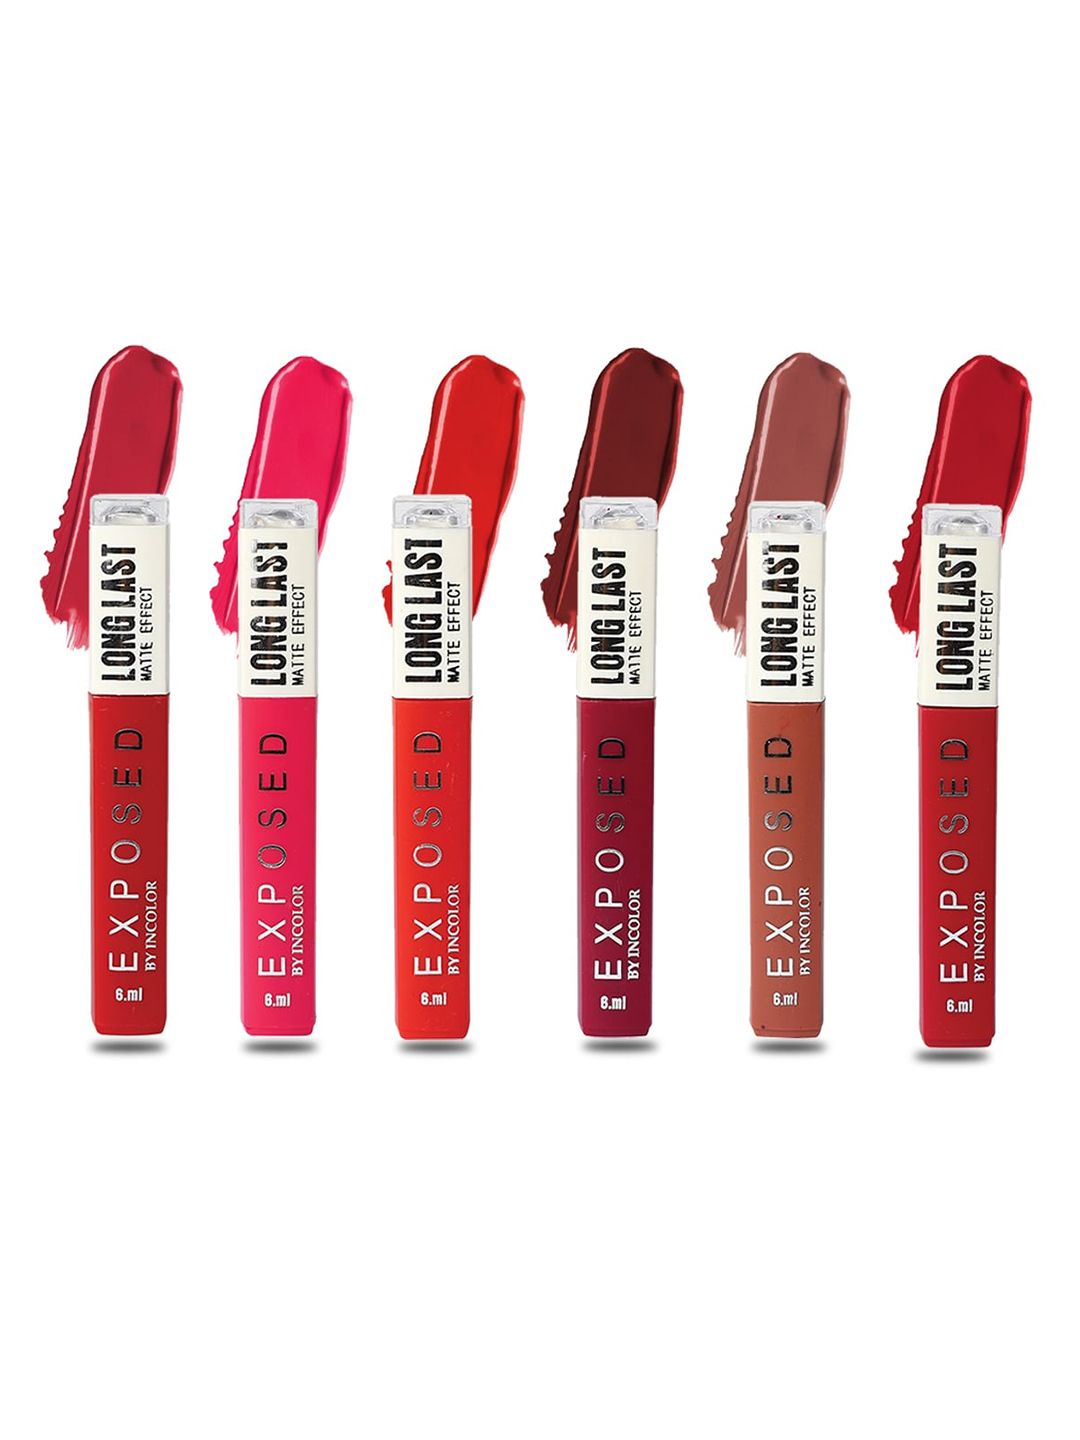 INCOLOR Set of 6 Exposed Long Last Matte Effect Lip Gloss 6 ml Each - Combo 03 Price in India